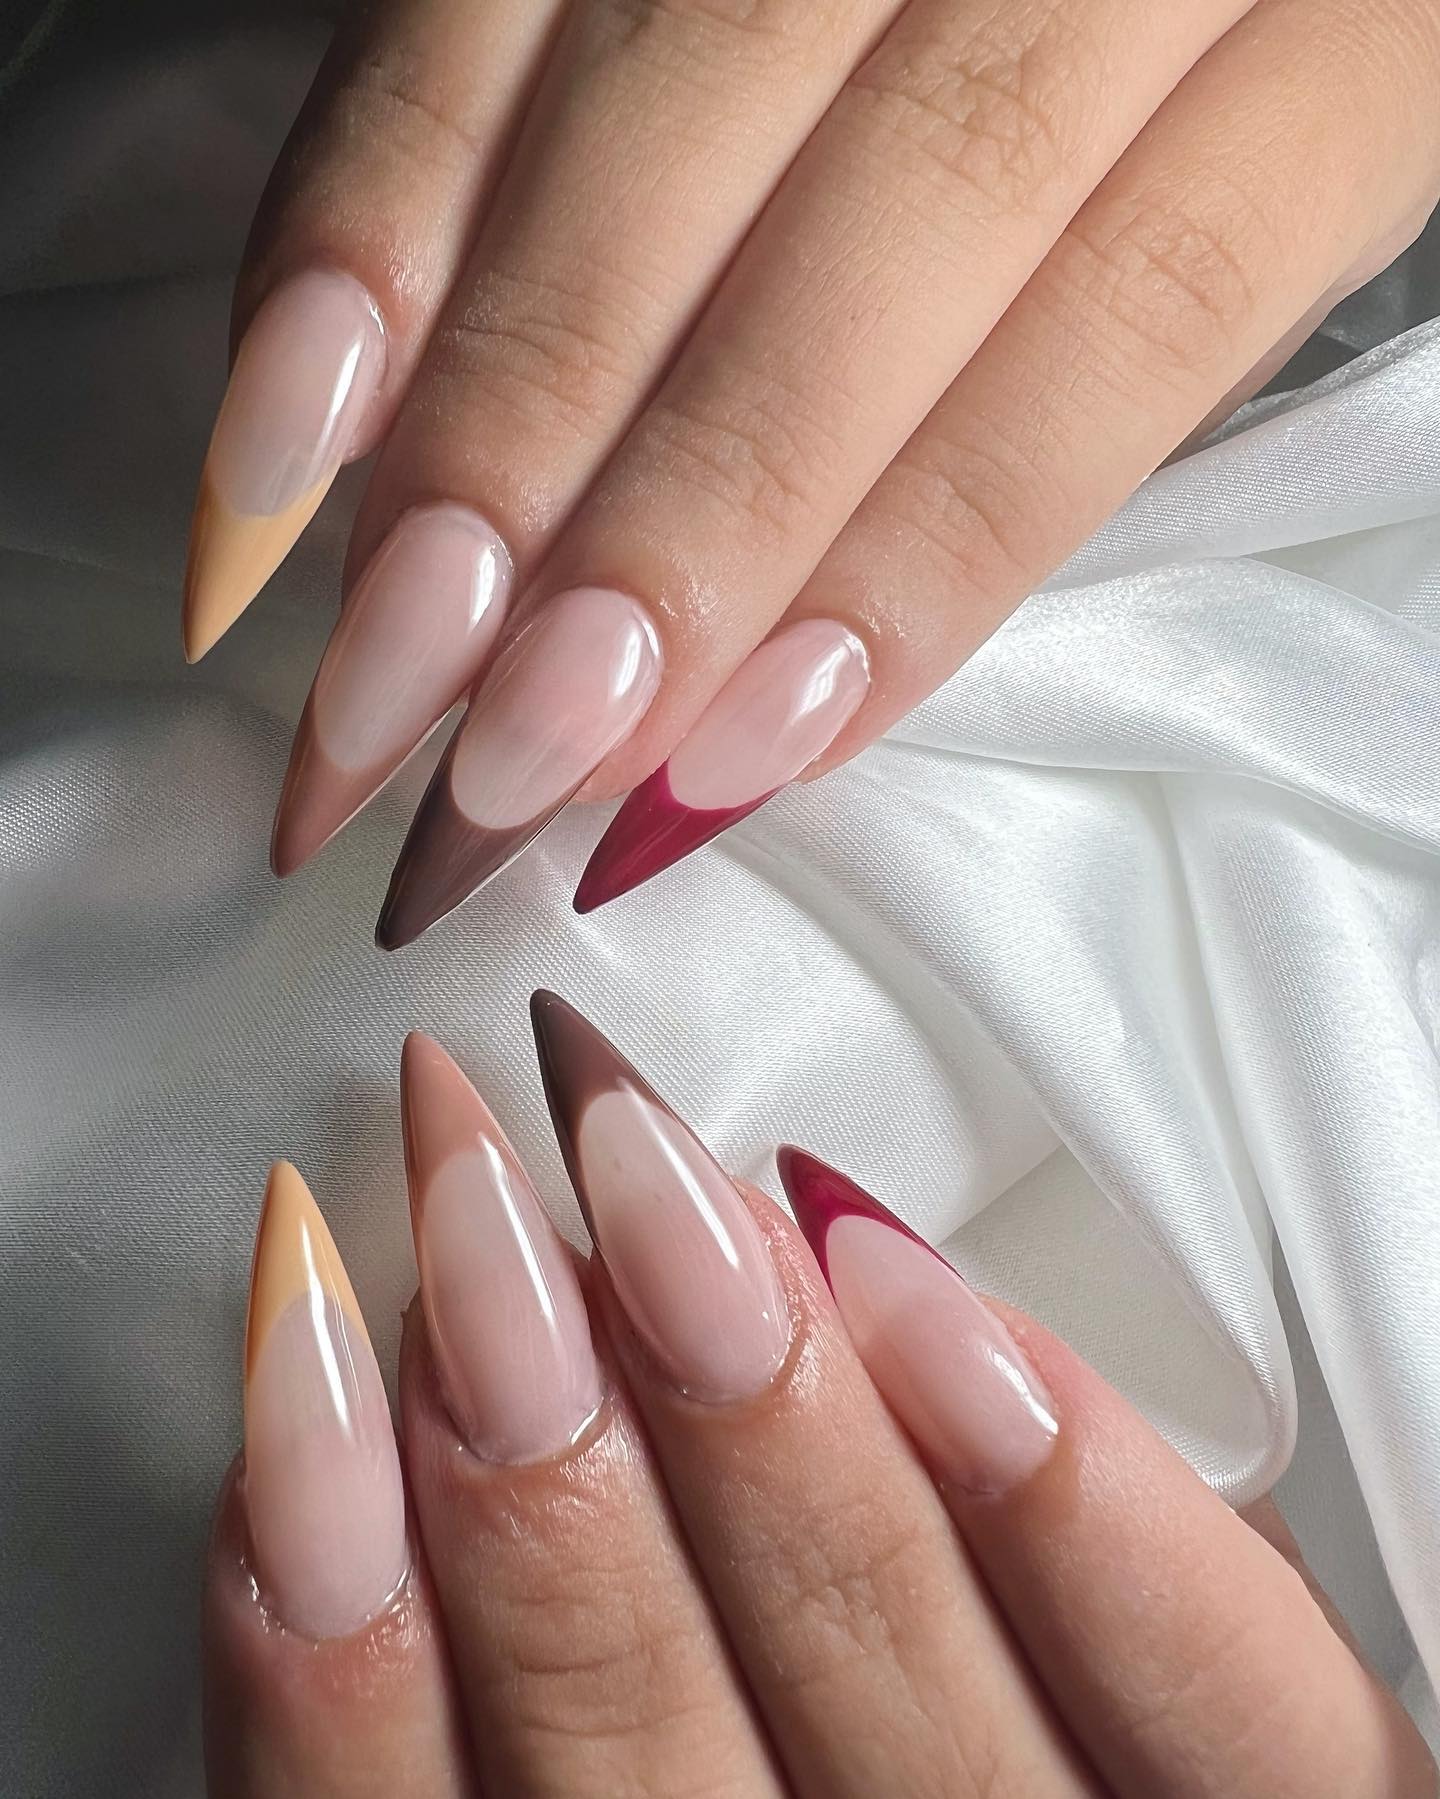 These soft and nude French tips are for nude lovers! Give it a shot if you like it.